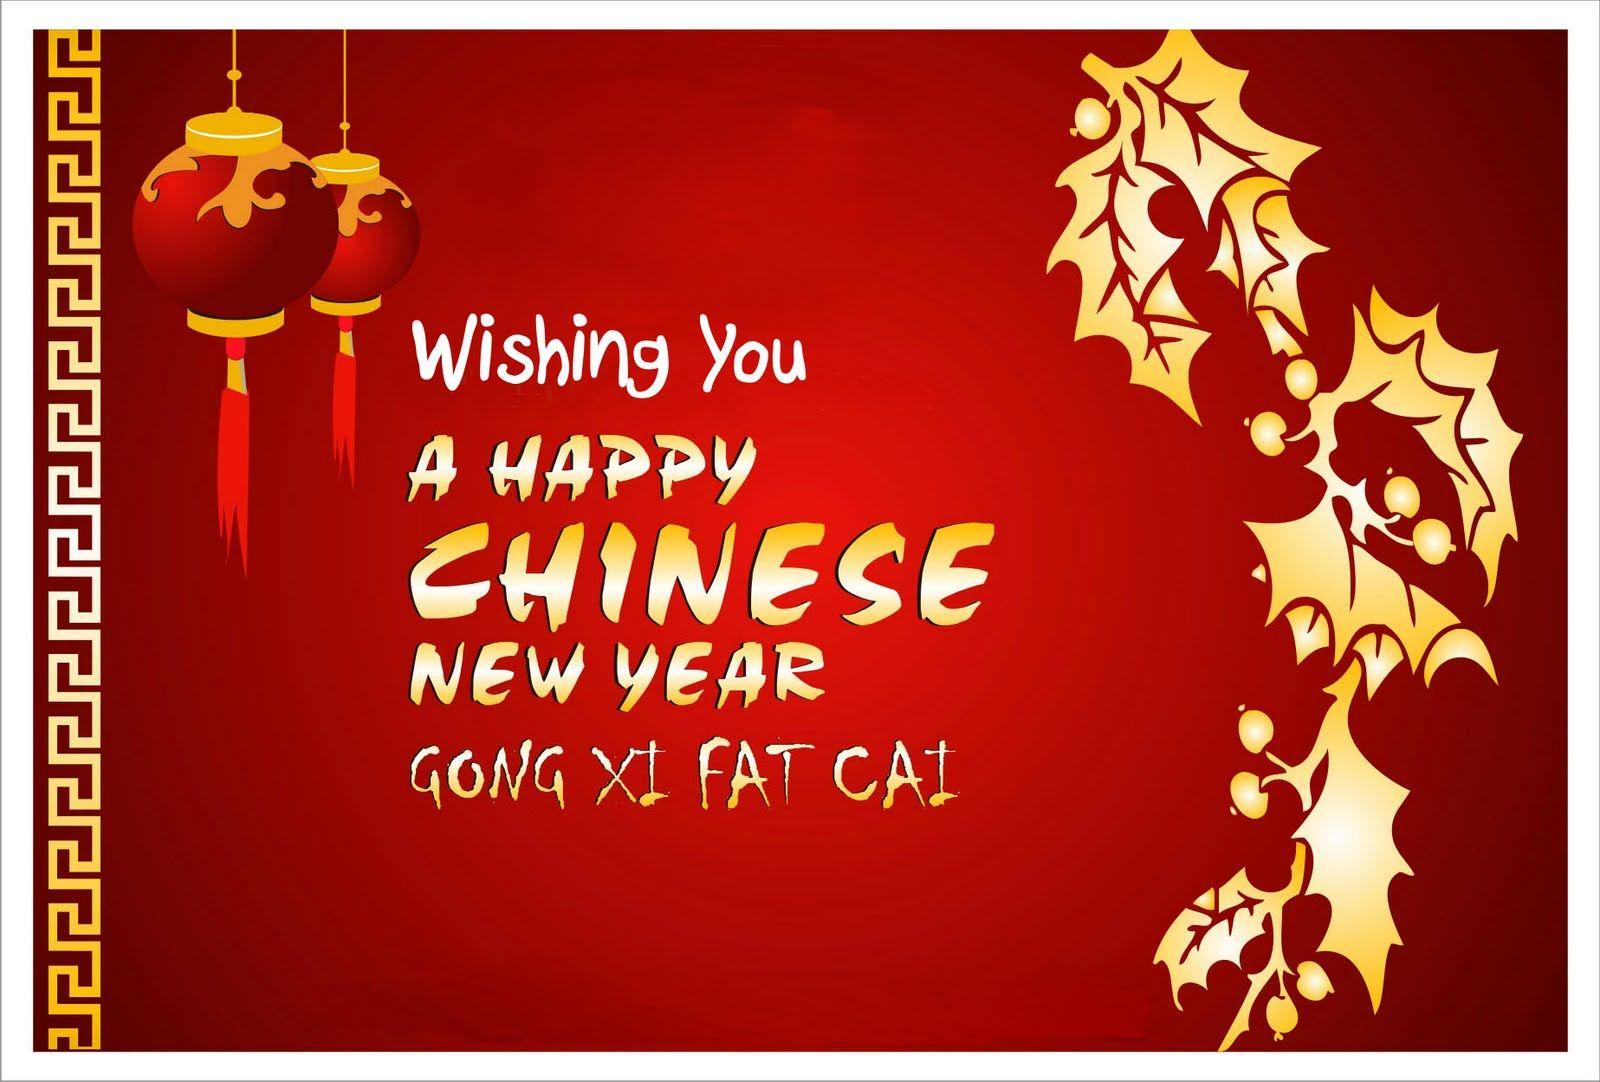 Chinese new year ipad wallpapers chinese new year wallpapers